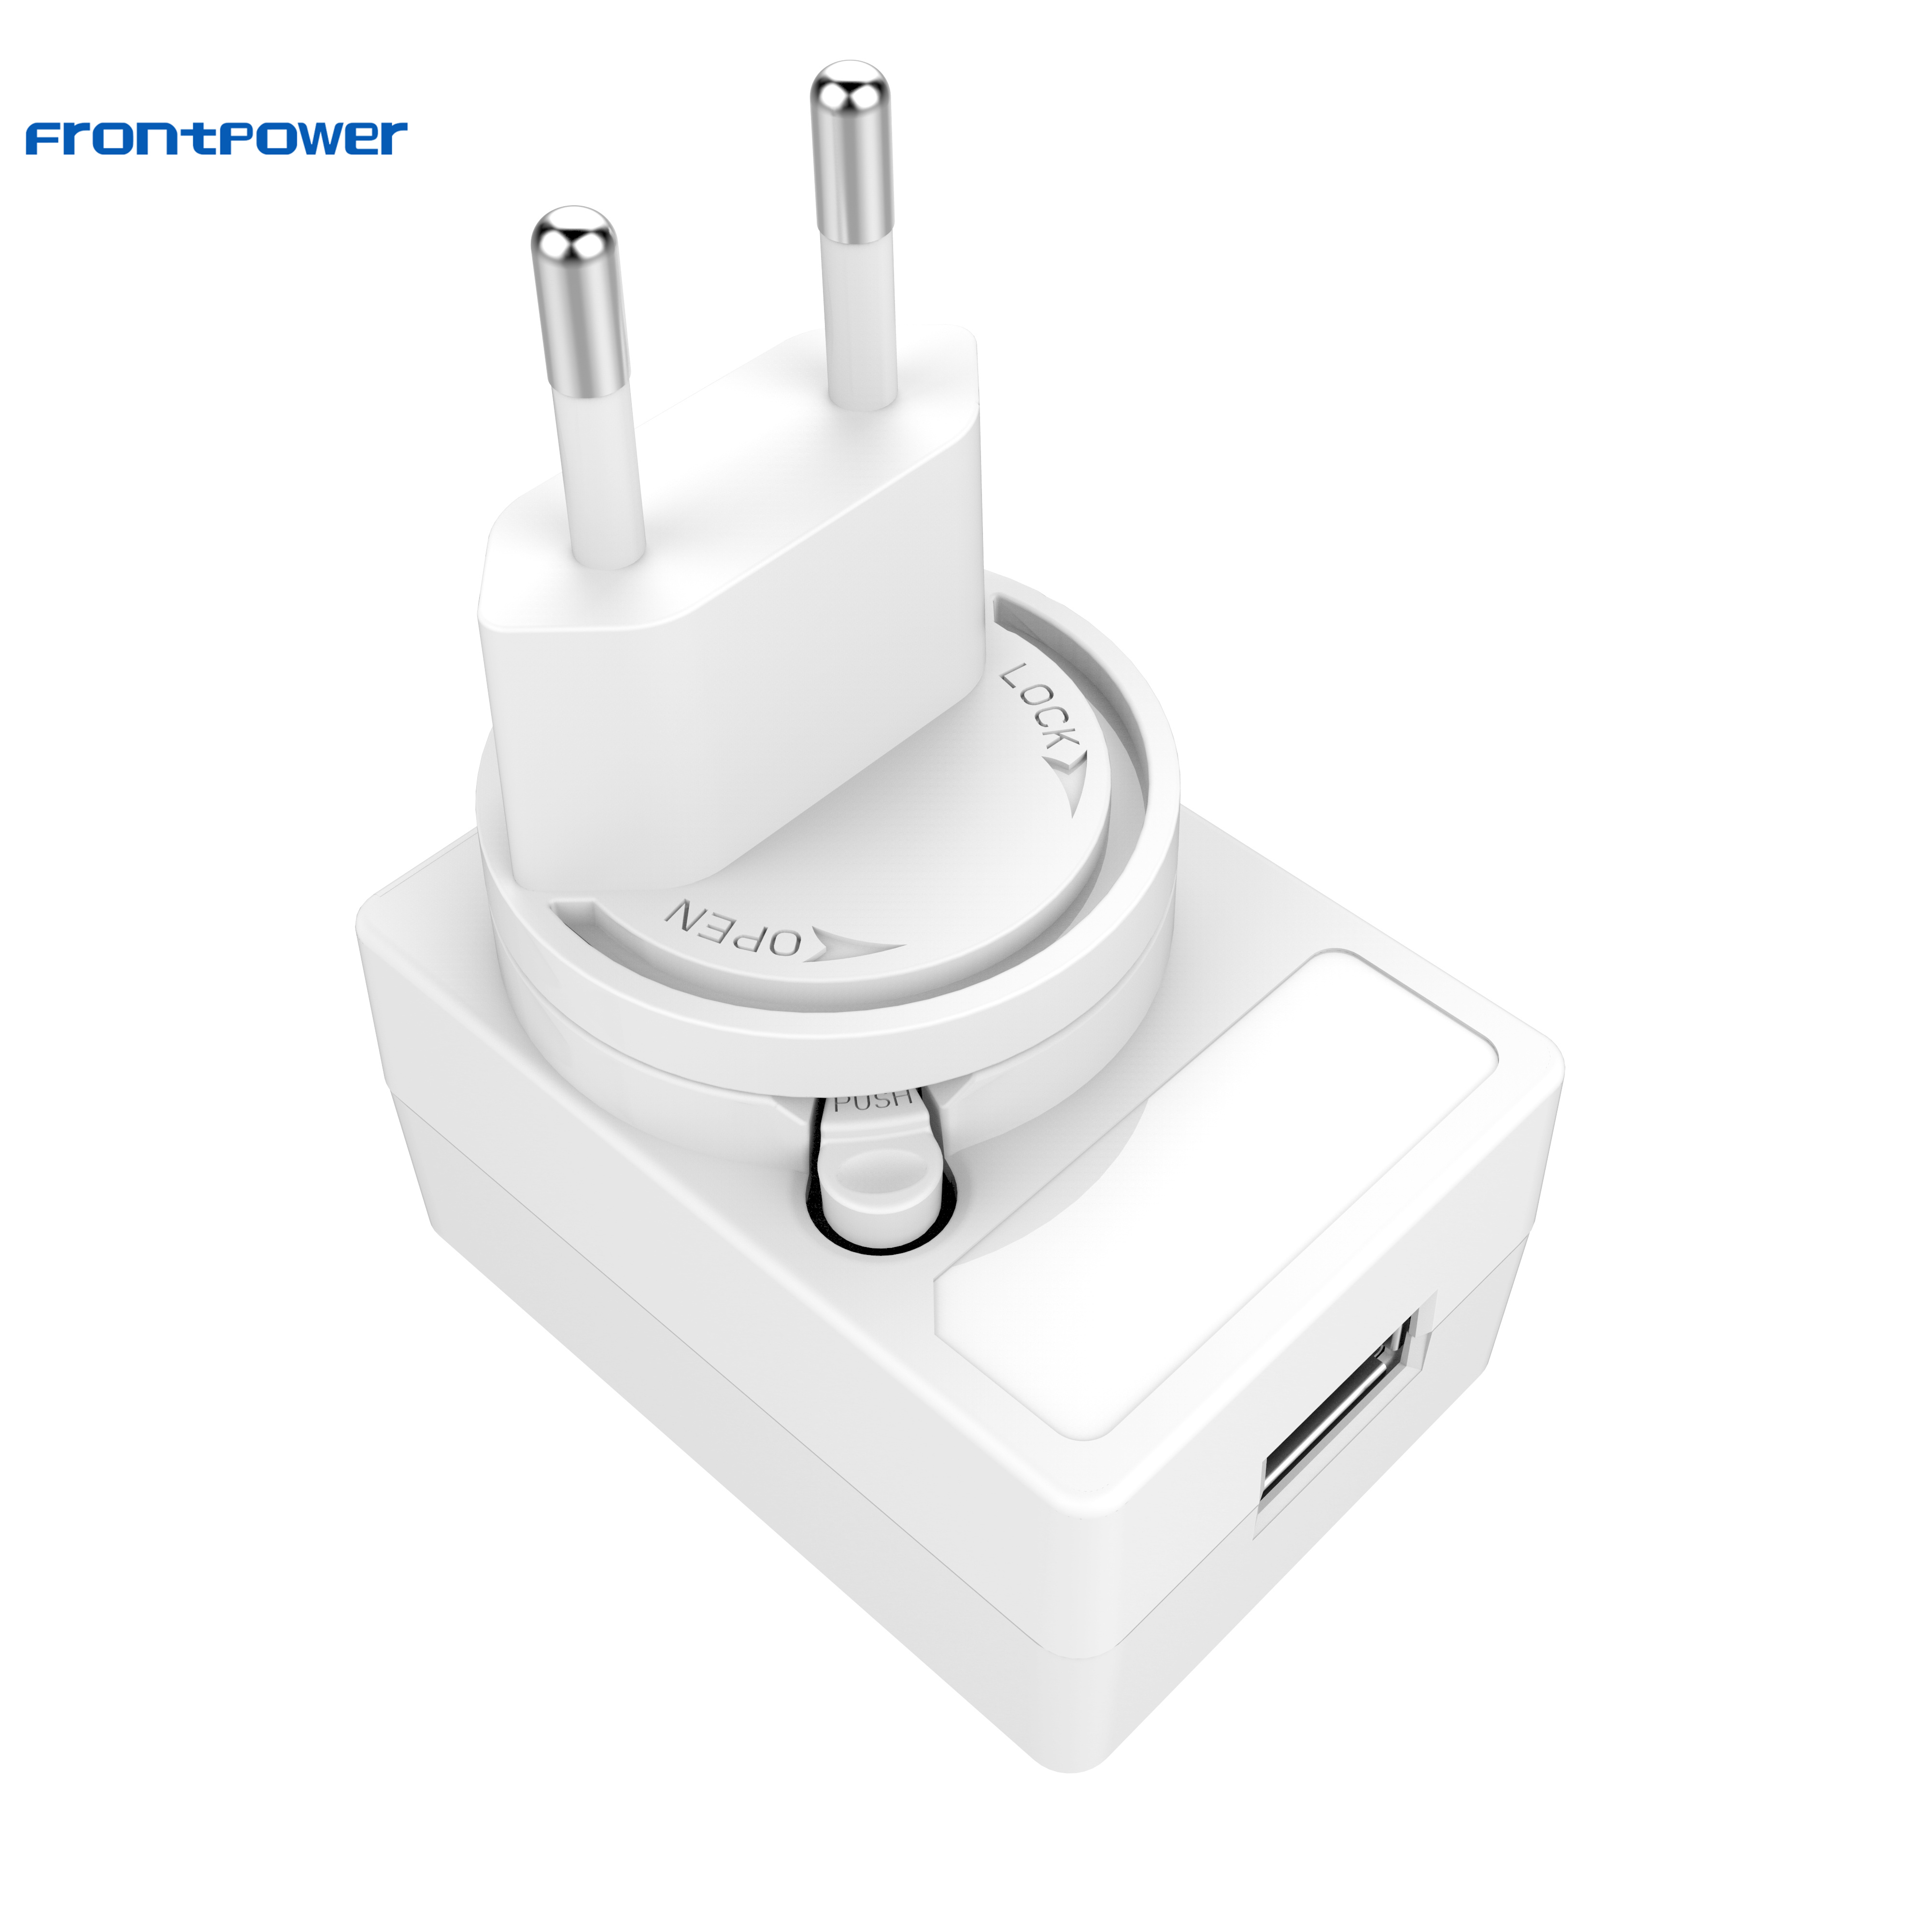 5V 1A 2A 2.5A 3A US EU UK AU BIS Plug USB Power Adapter Supply SMPS ACDC Charger for Phone with BIS/ECAS/UL/CE/GS/SAA/KC/PSE/ETL